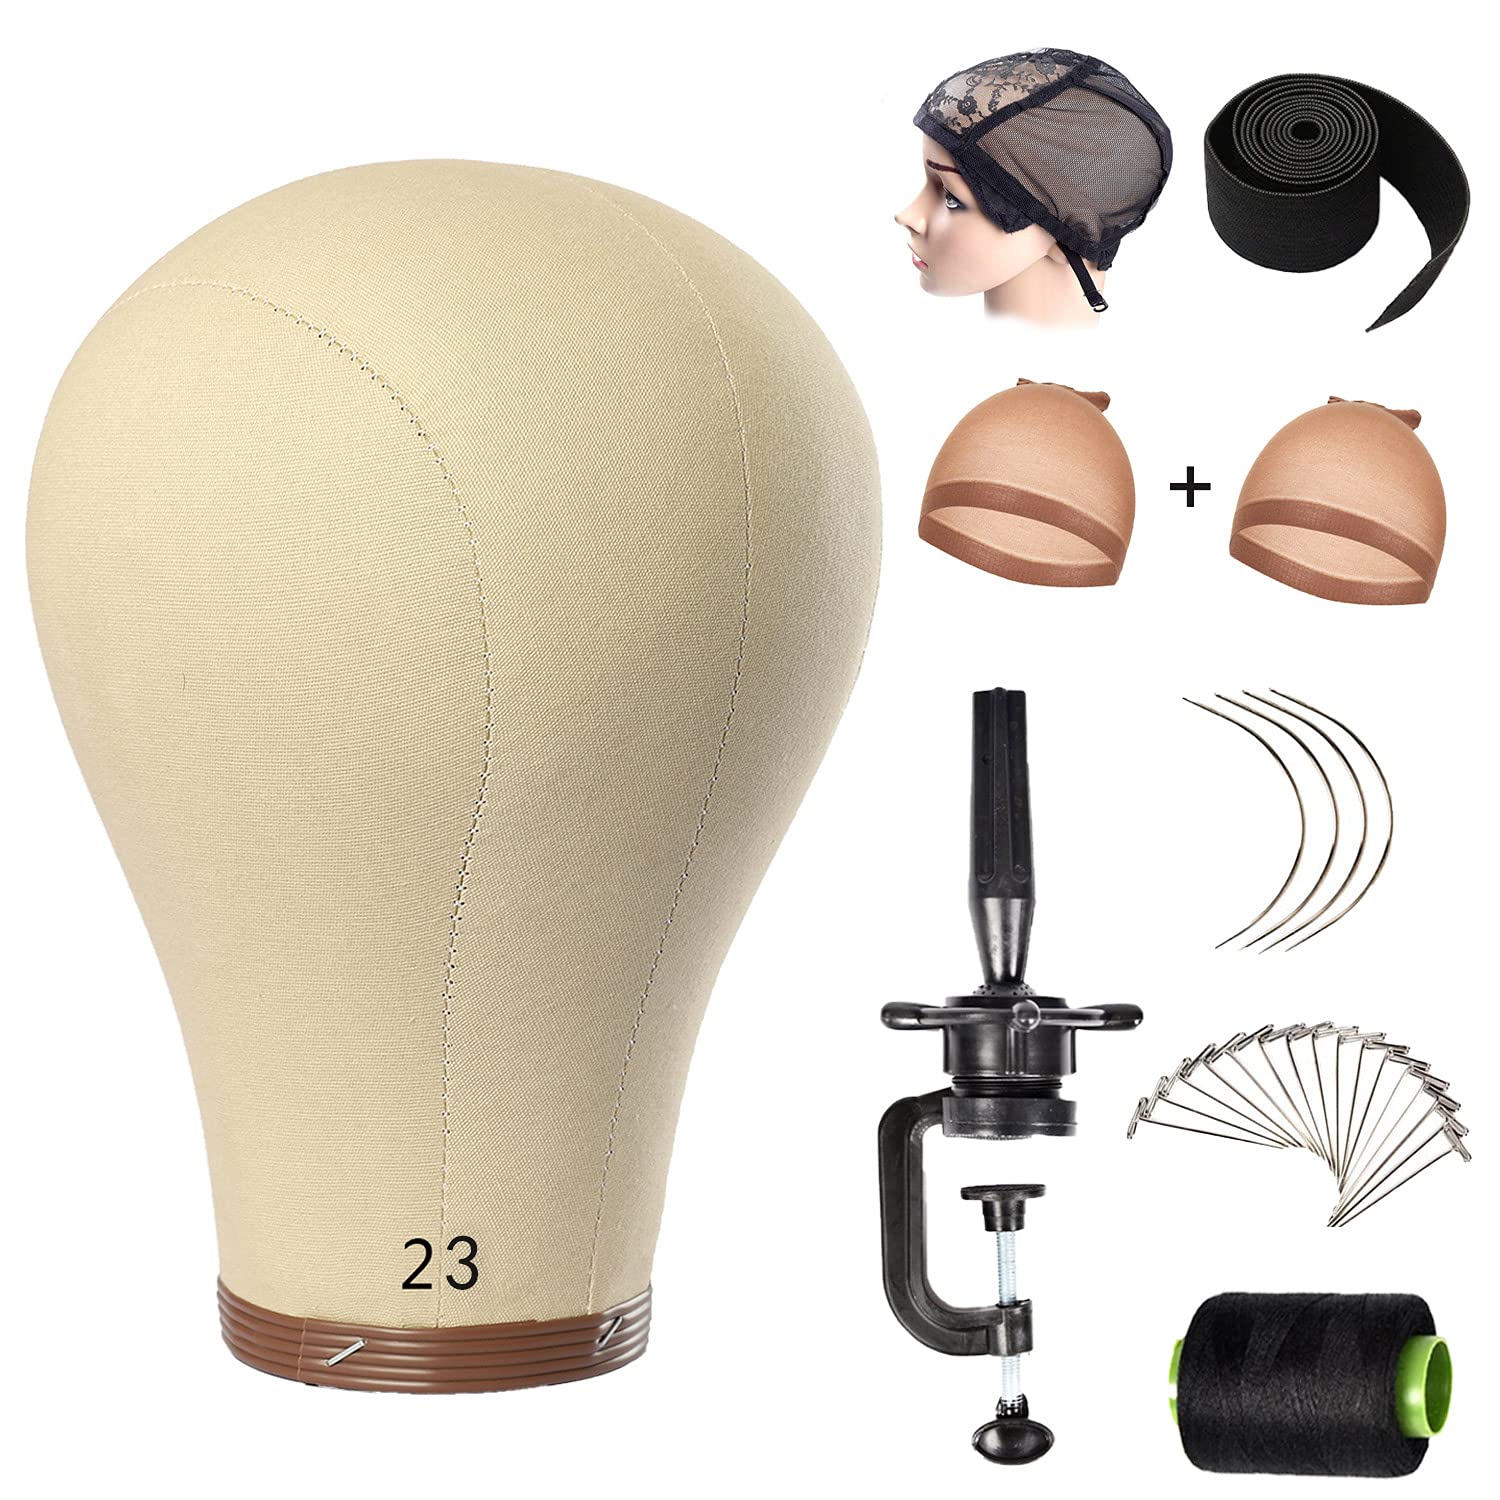 GetUSCart- Cork Canvas Wig Mannequin Head for Wigs 21 22 23 24 inch Wig  Head Stand for Styling Making Display Canvas Head for Wigs with Stand  Maniquins Manican Head Set Included (21 inch)